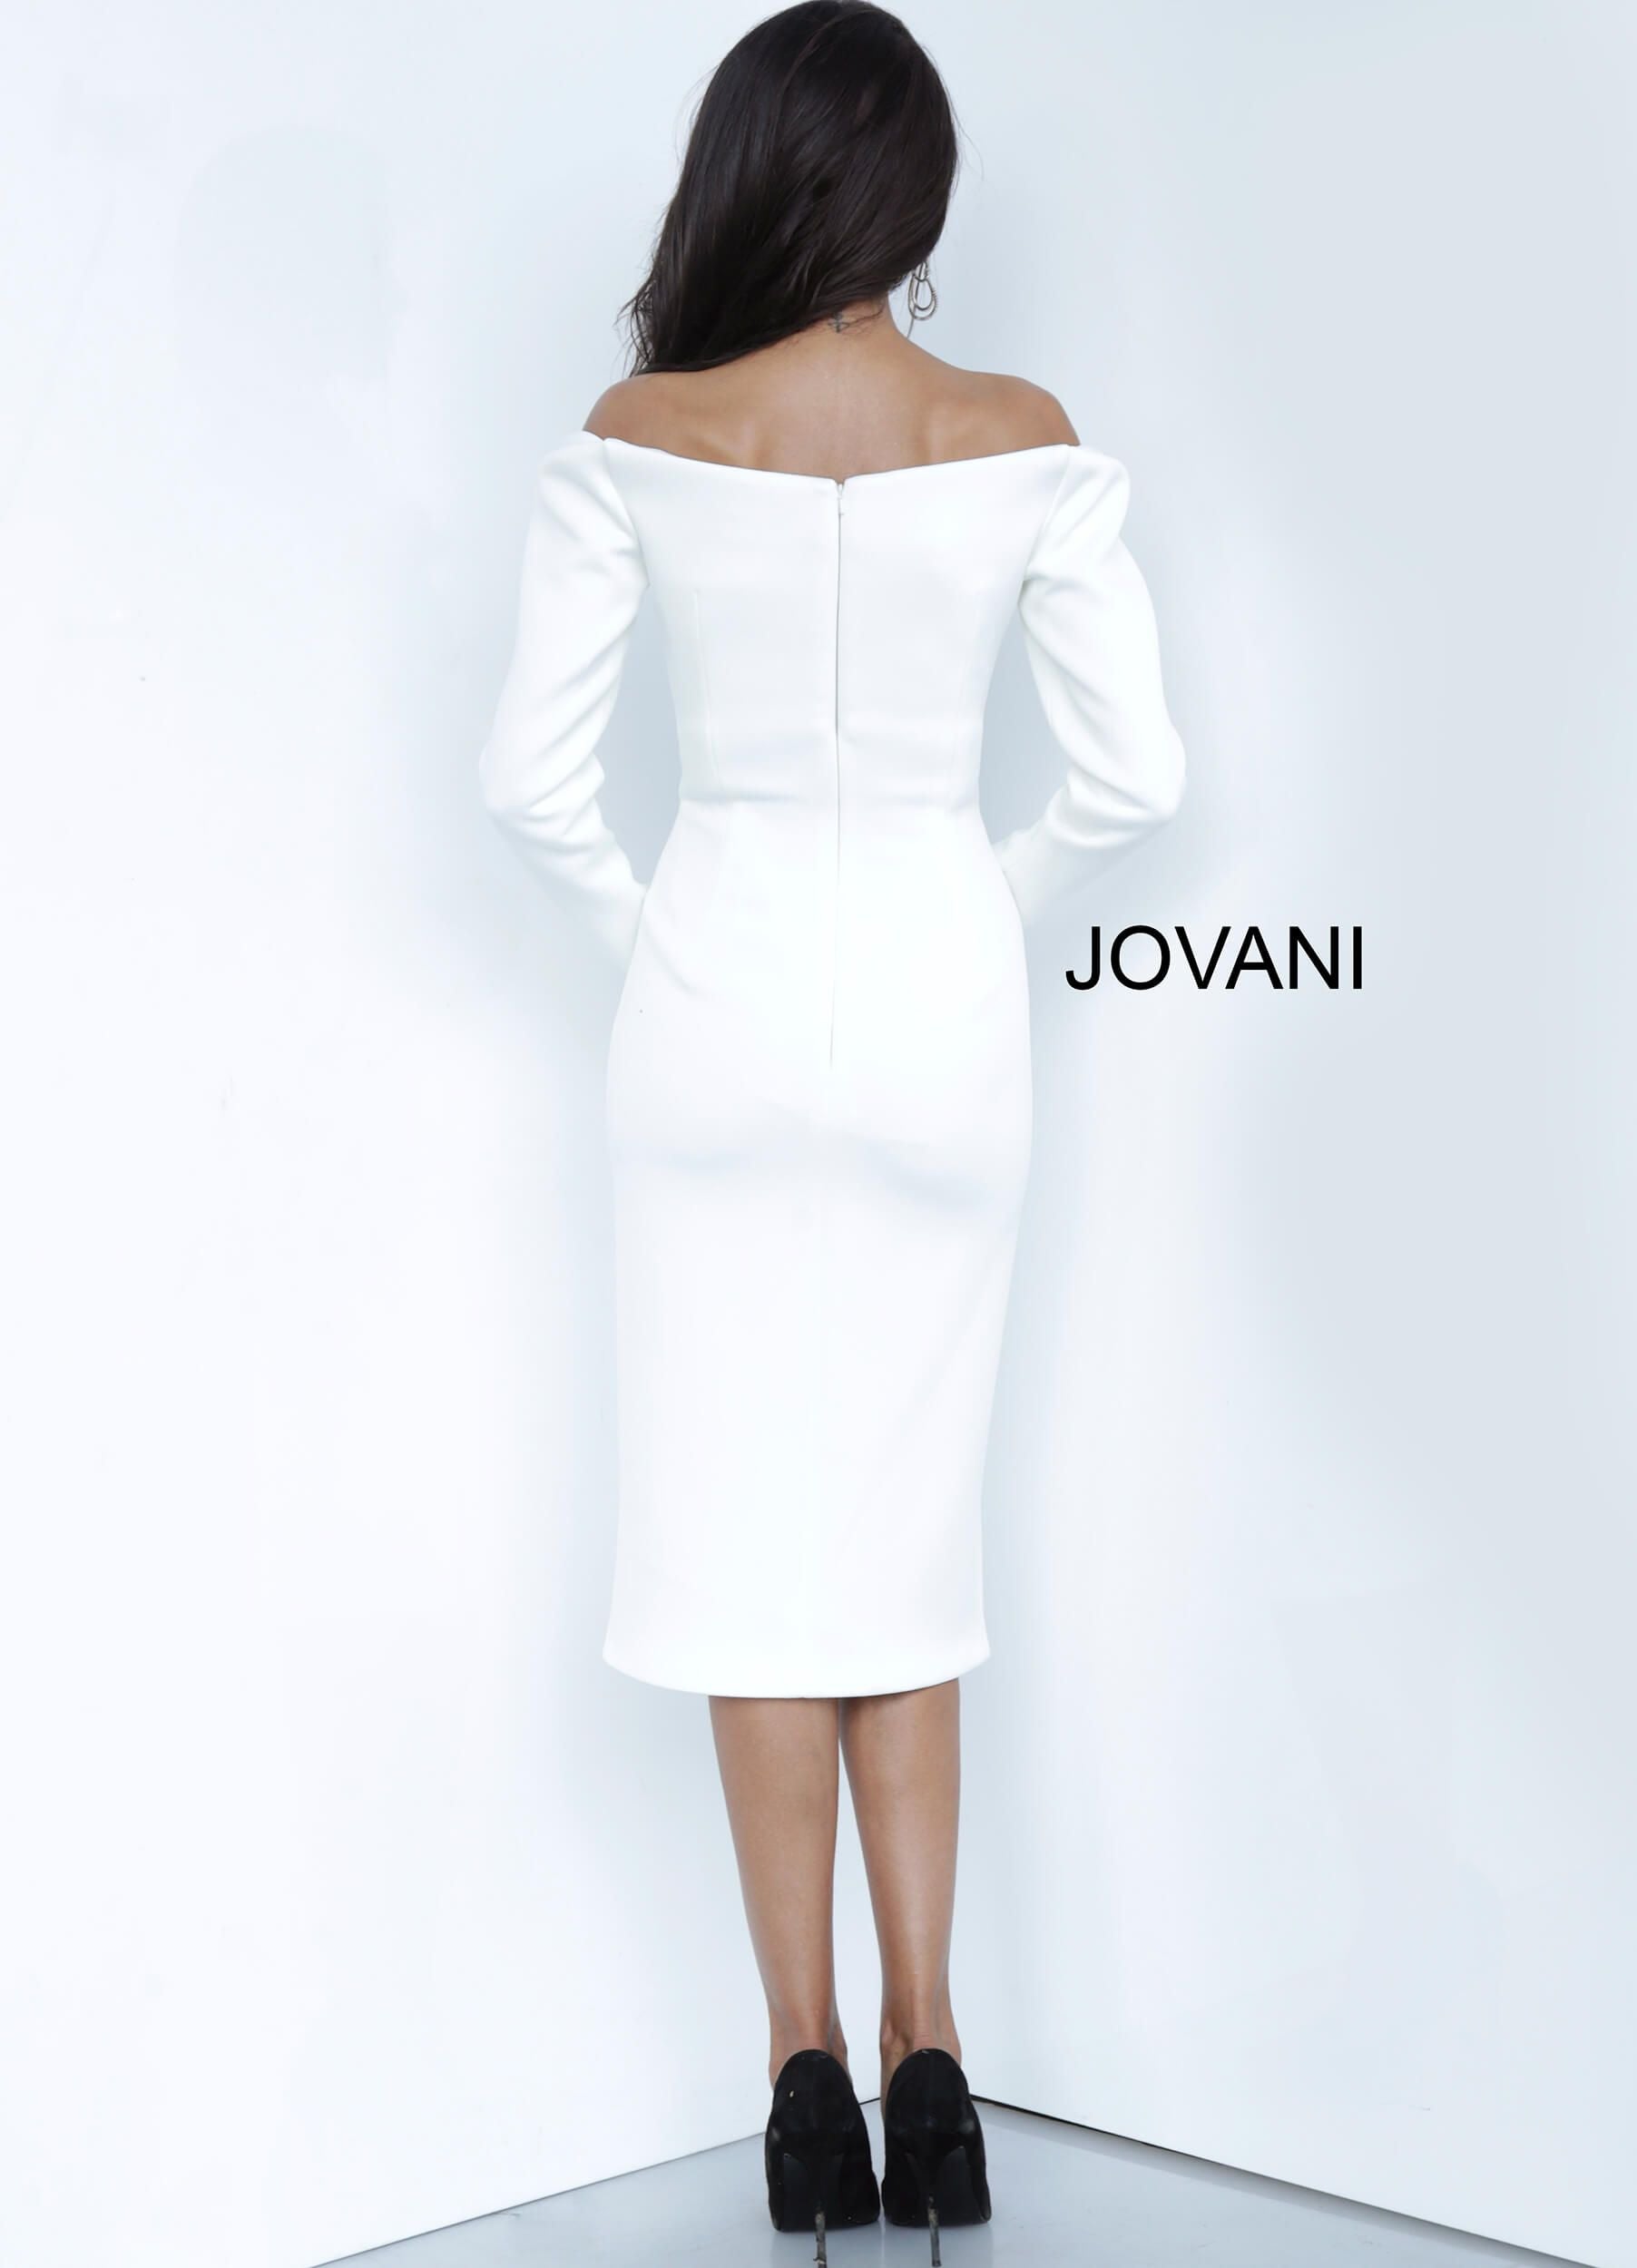 Jovani 3570 sweetheart neckline off the shoulder long sleeves fitted knee length cocktail dress Form fitting scuba double breasted cocktail dress, knee length skirt with double front slit, off the shoulder bodice with long sleeves and sweetehart neckline.   Available colors:  Black, White  Available sizes:  00-24 